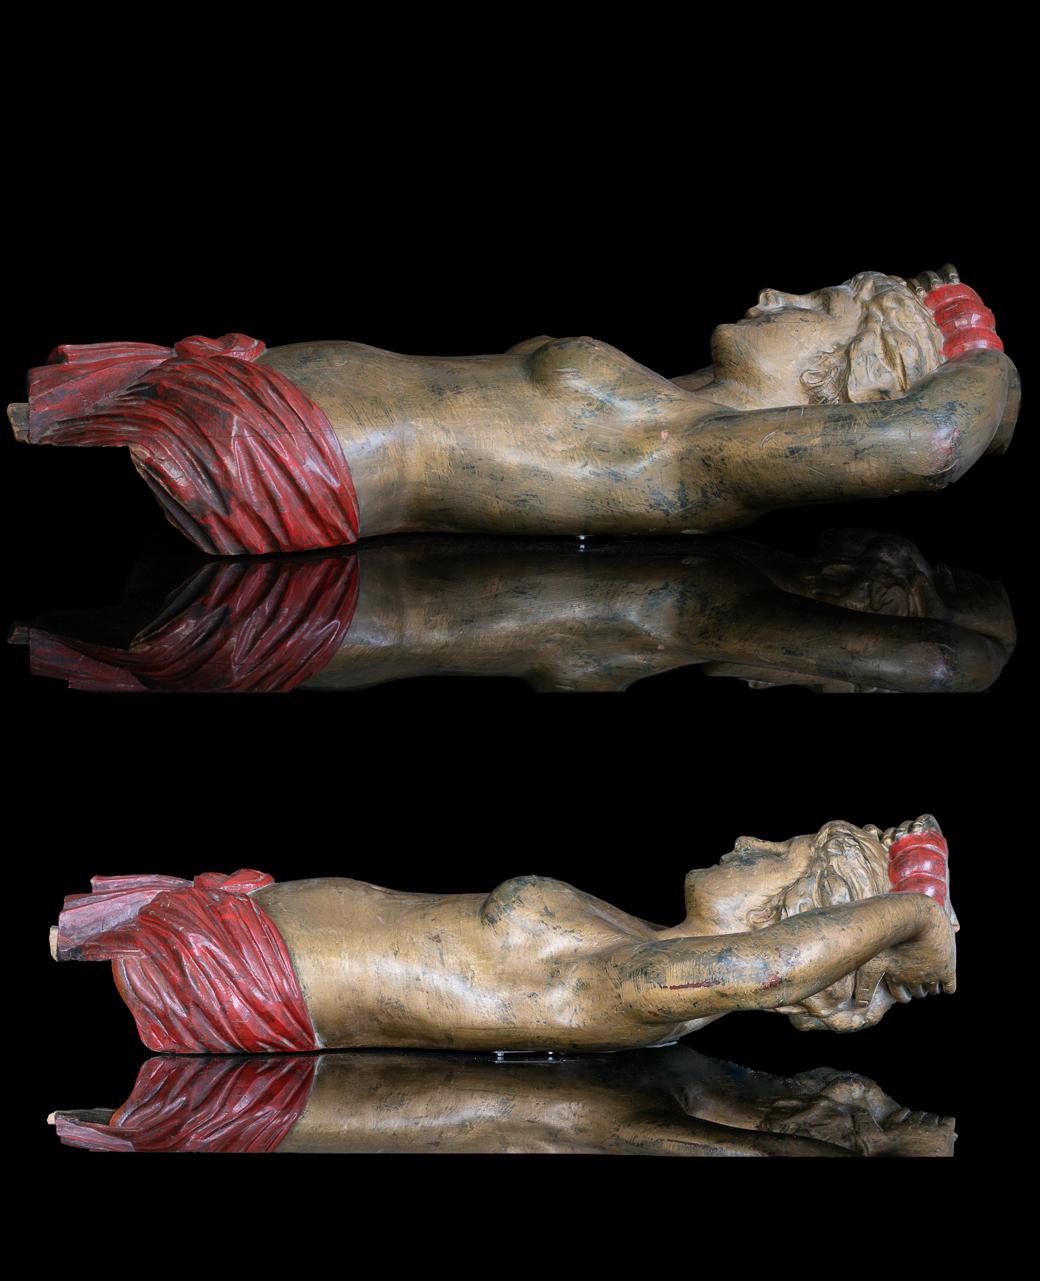 This pair of female torsos presumably decorated a fair stand or an organ in a theme park. They were most likely part of a significant organ intended to entertain the people with their impressive sound. A fairground 80-keyless organ with similar